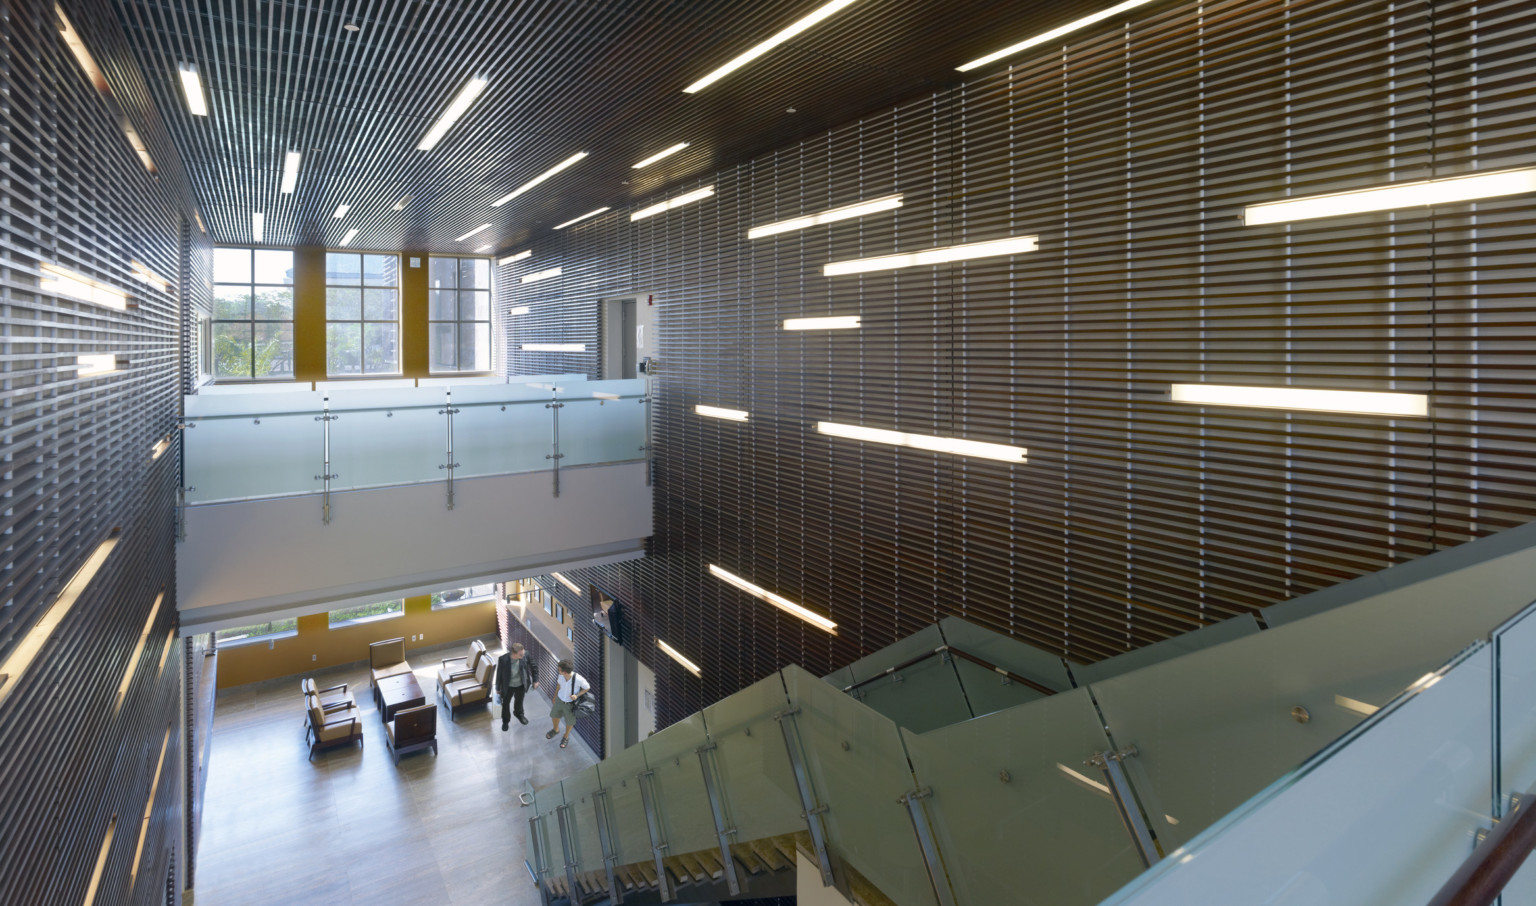 interior view looking down to lower level of U.S. Consulate with linear light features recessed into textured walls, ceiling